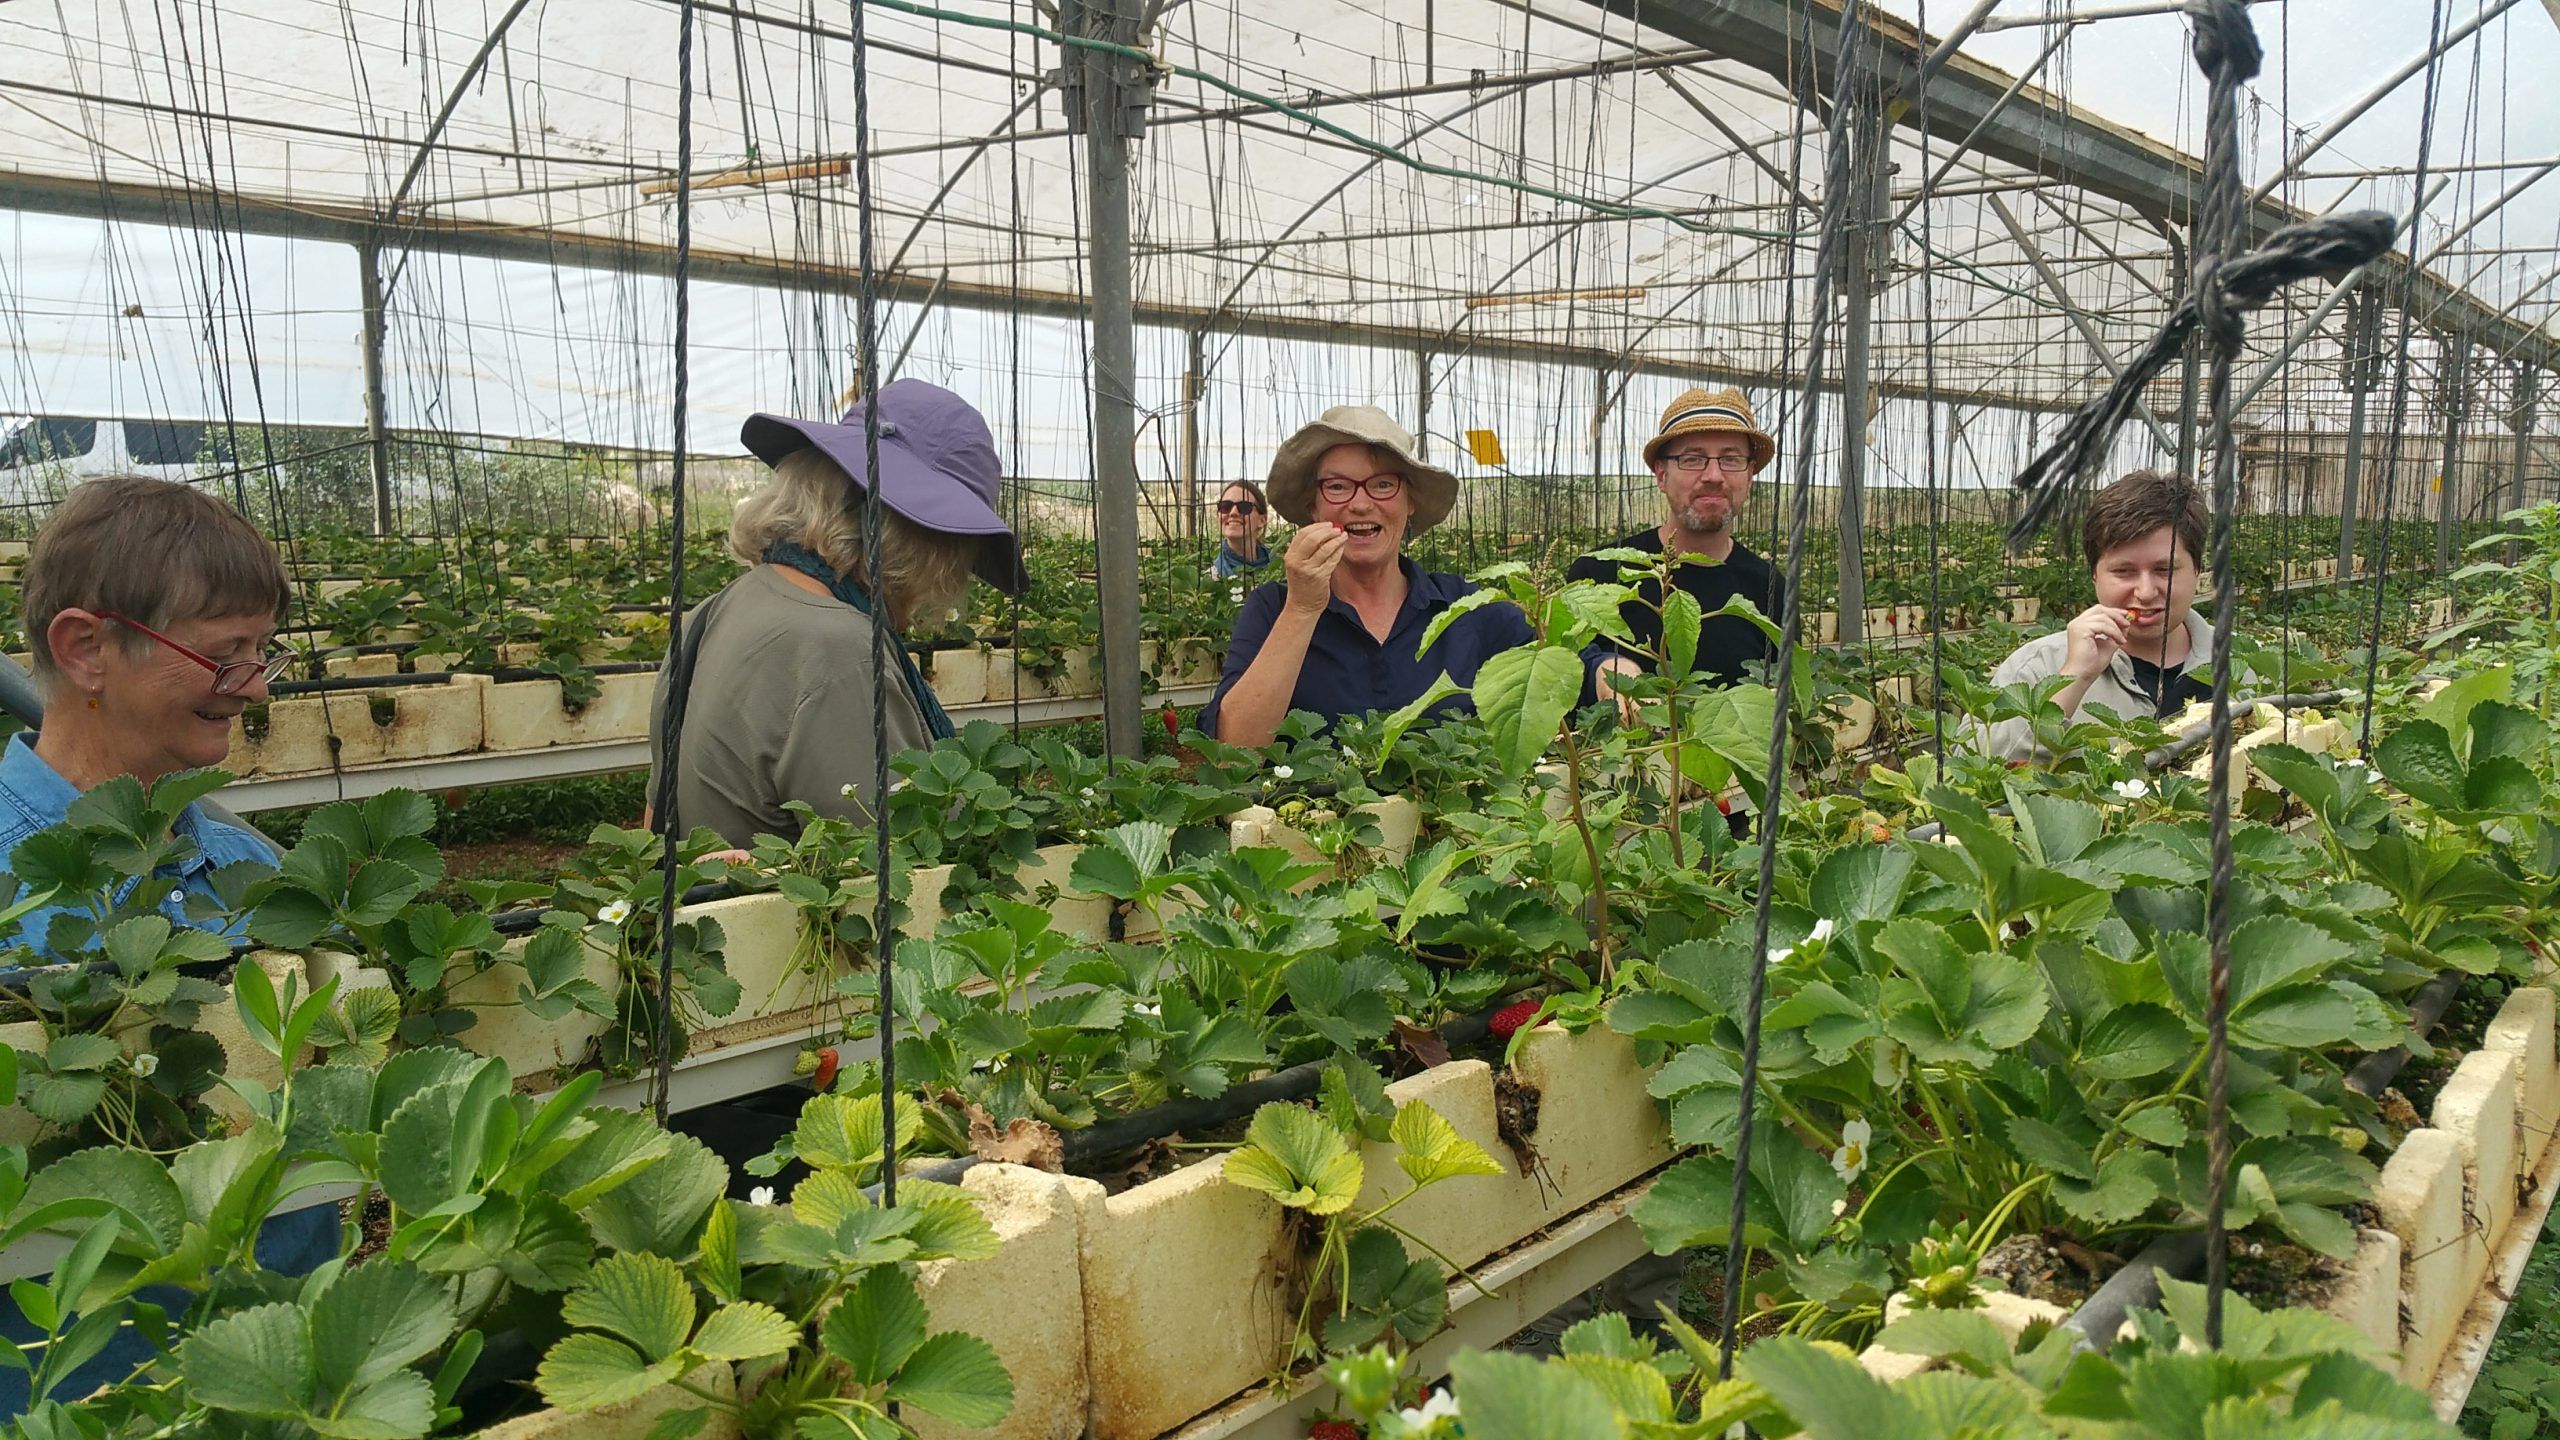 People eating strawberries in a hydroponics shed